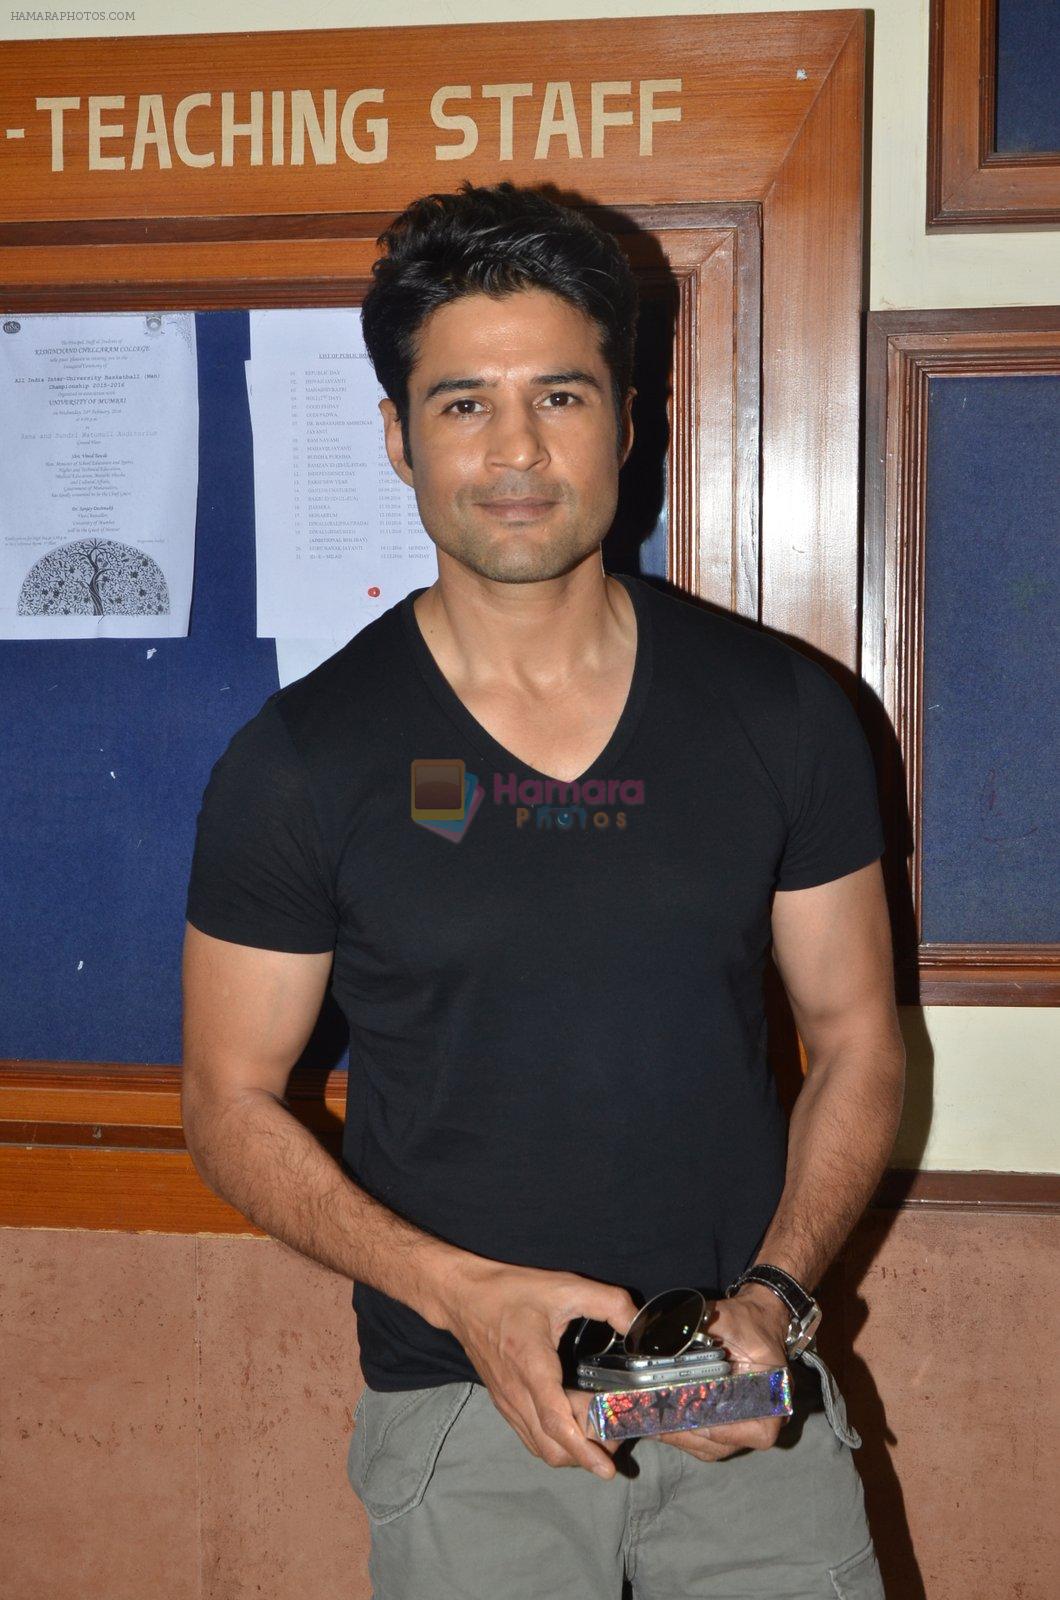 Rajeev Khandelwal during the launch of Young Bhartiya Foundation, an initiative by Ameya Pratap Singh in Mumbai, India on June 18, 2016